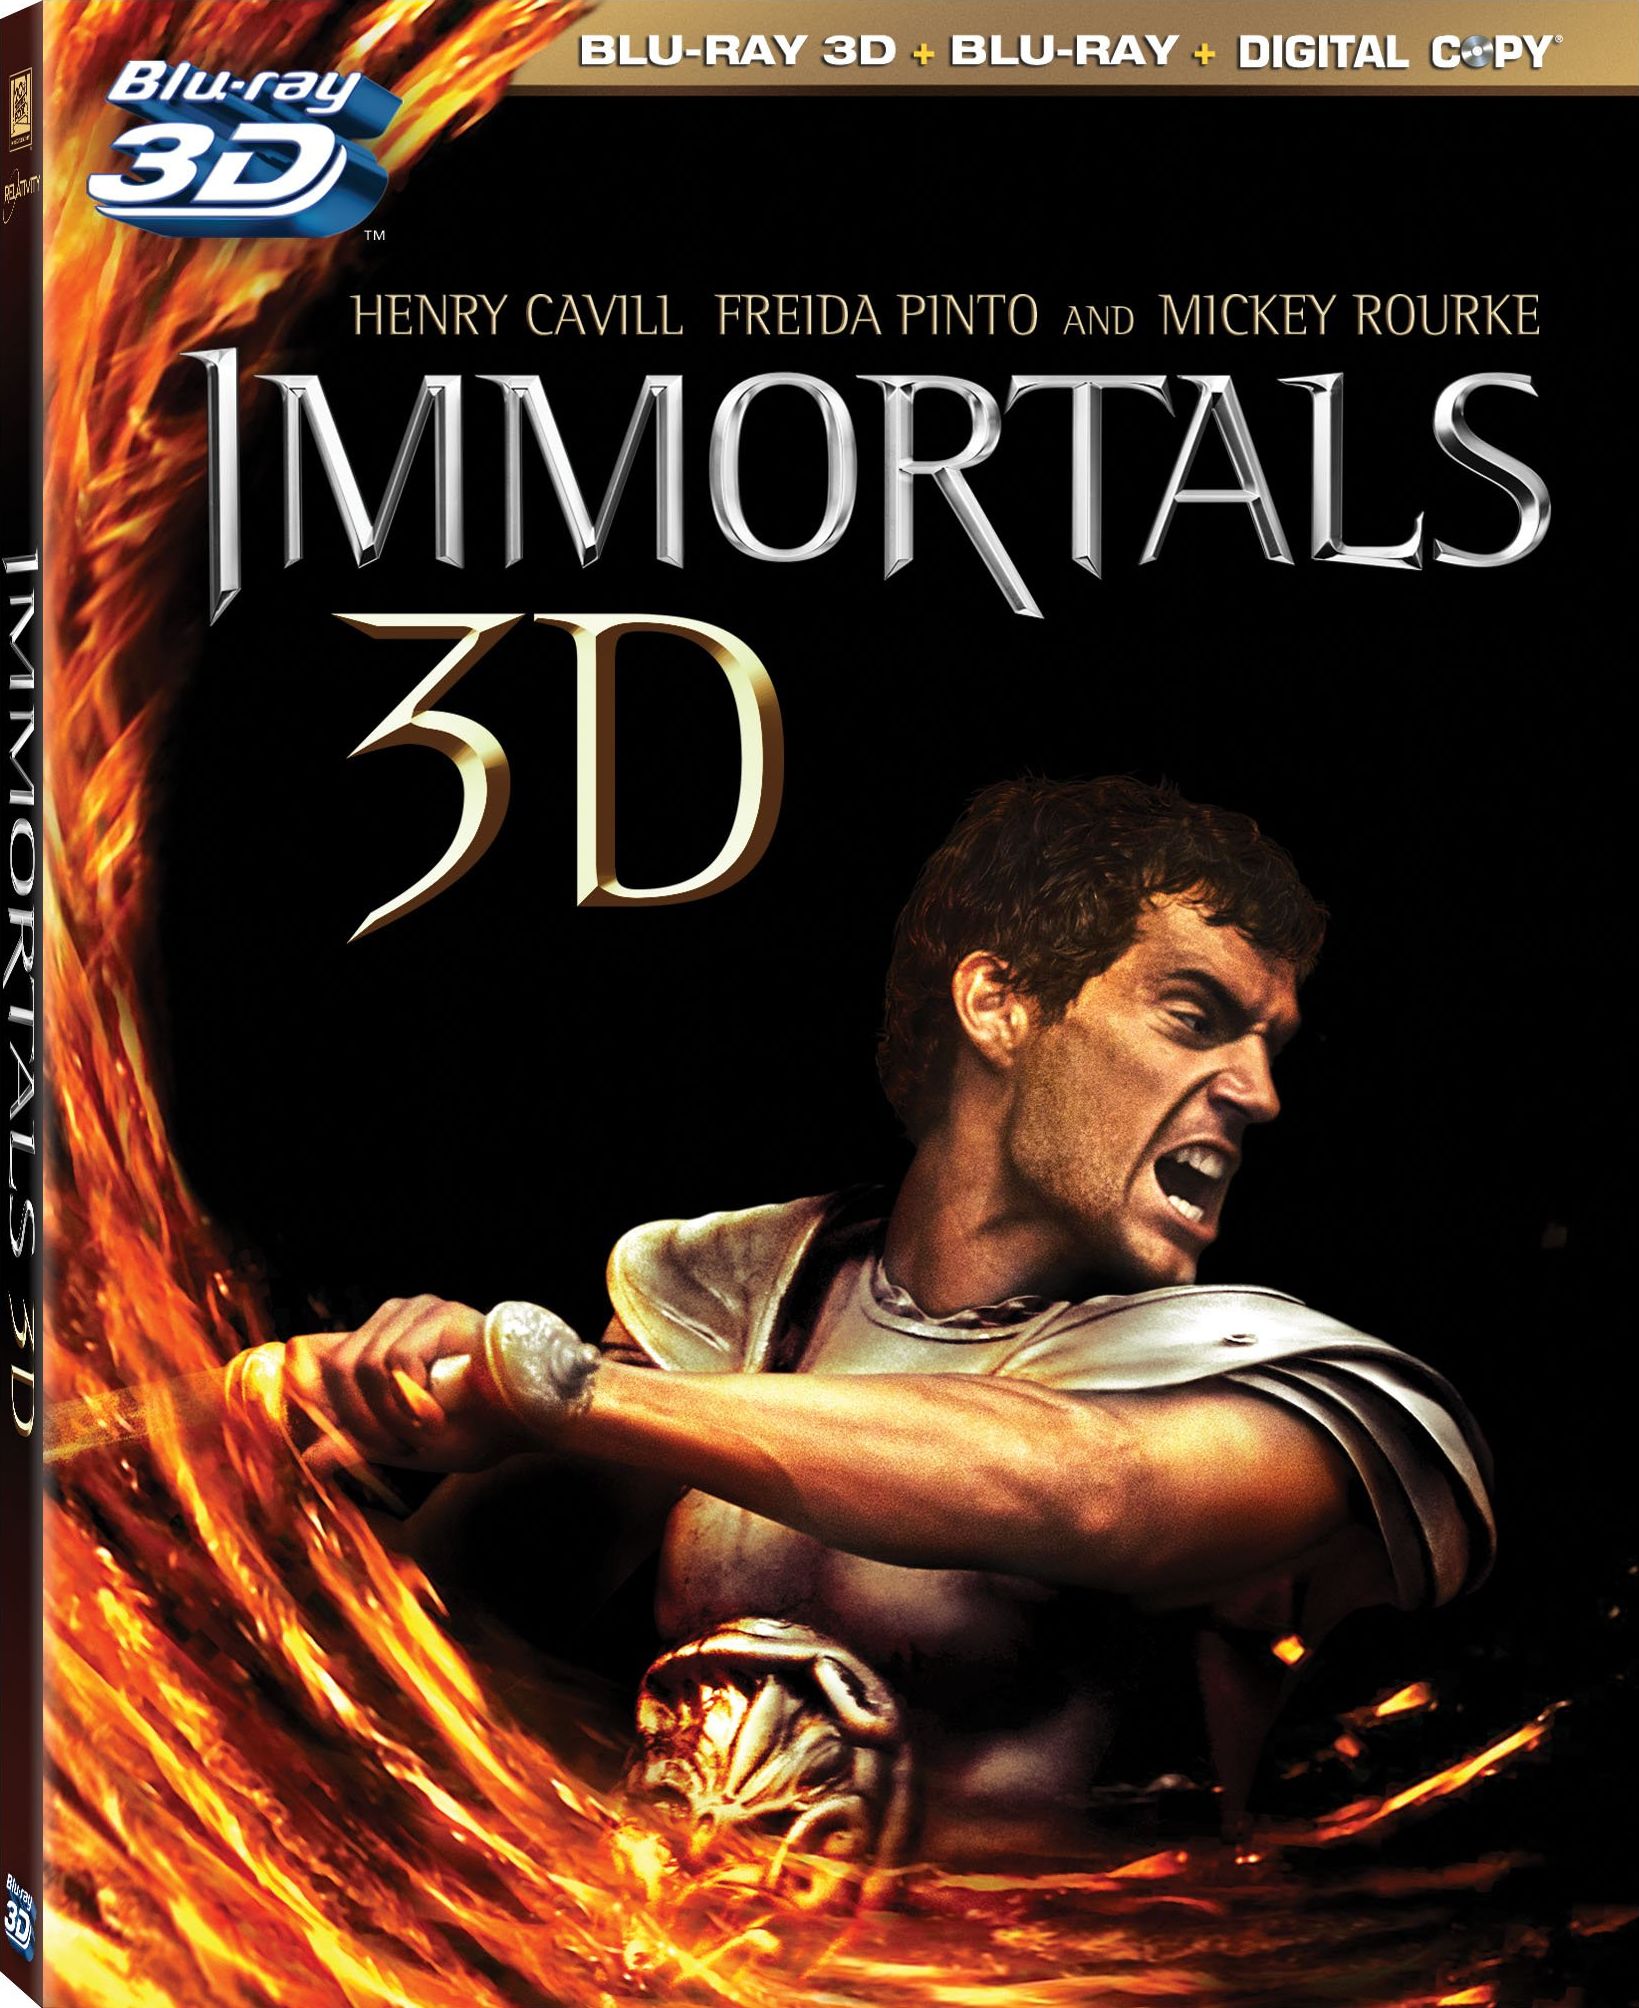 Immortals DVD Release Date March 6, 20121639 x 2008